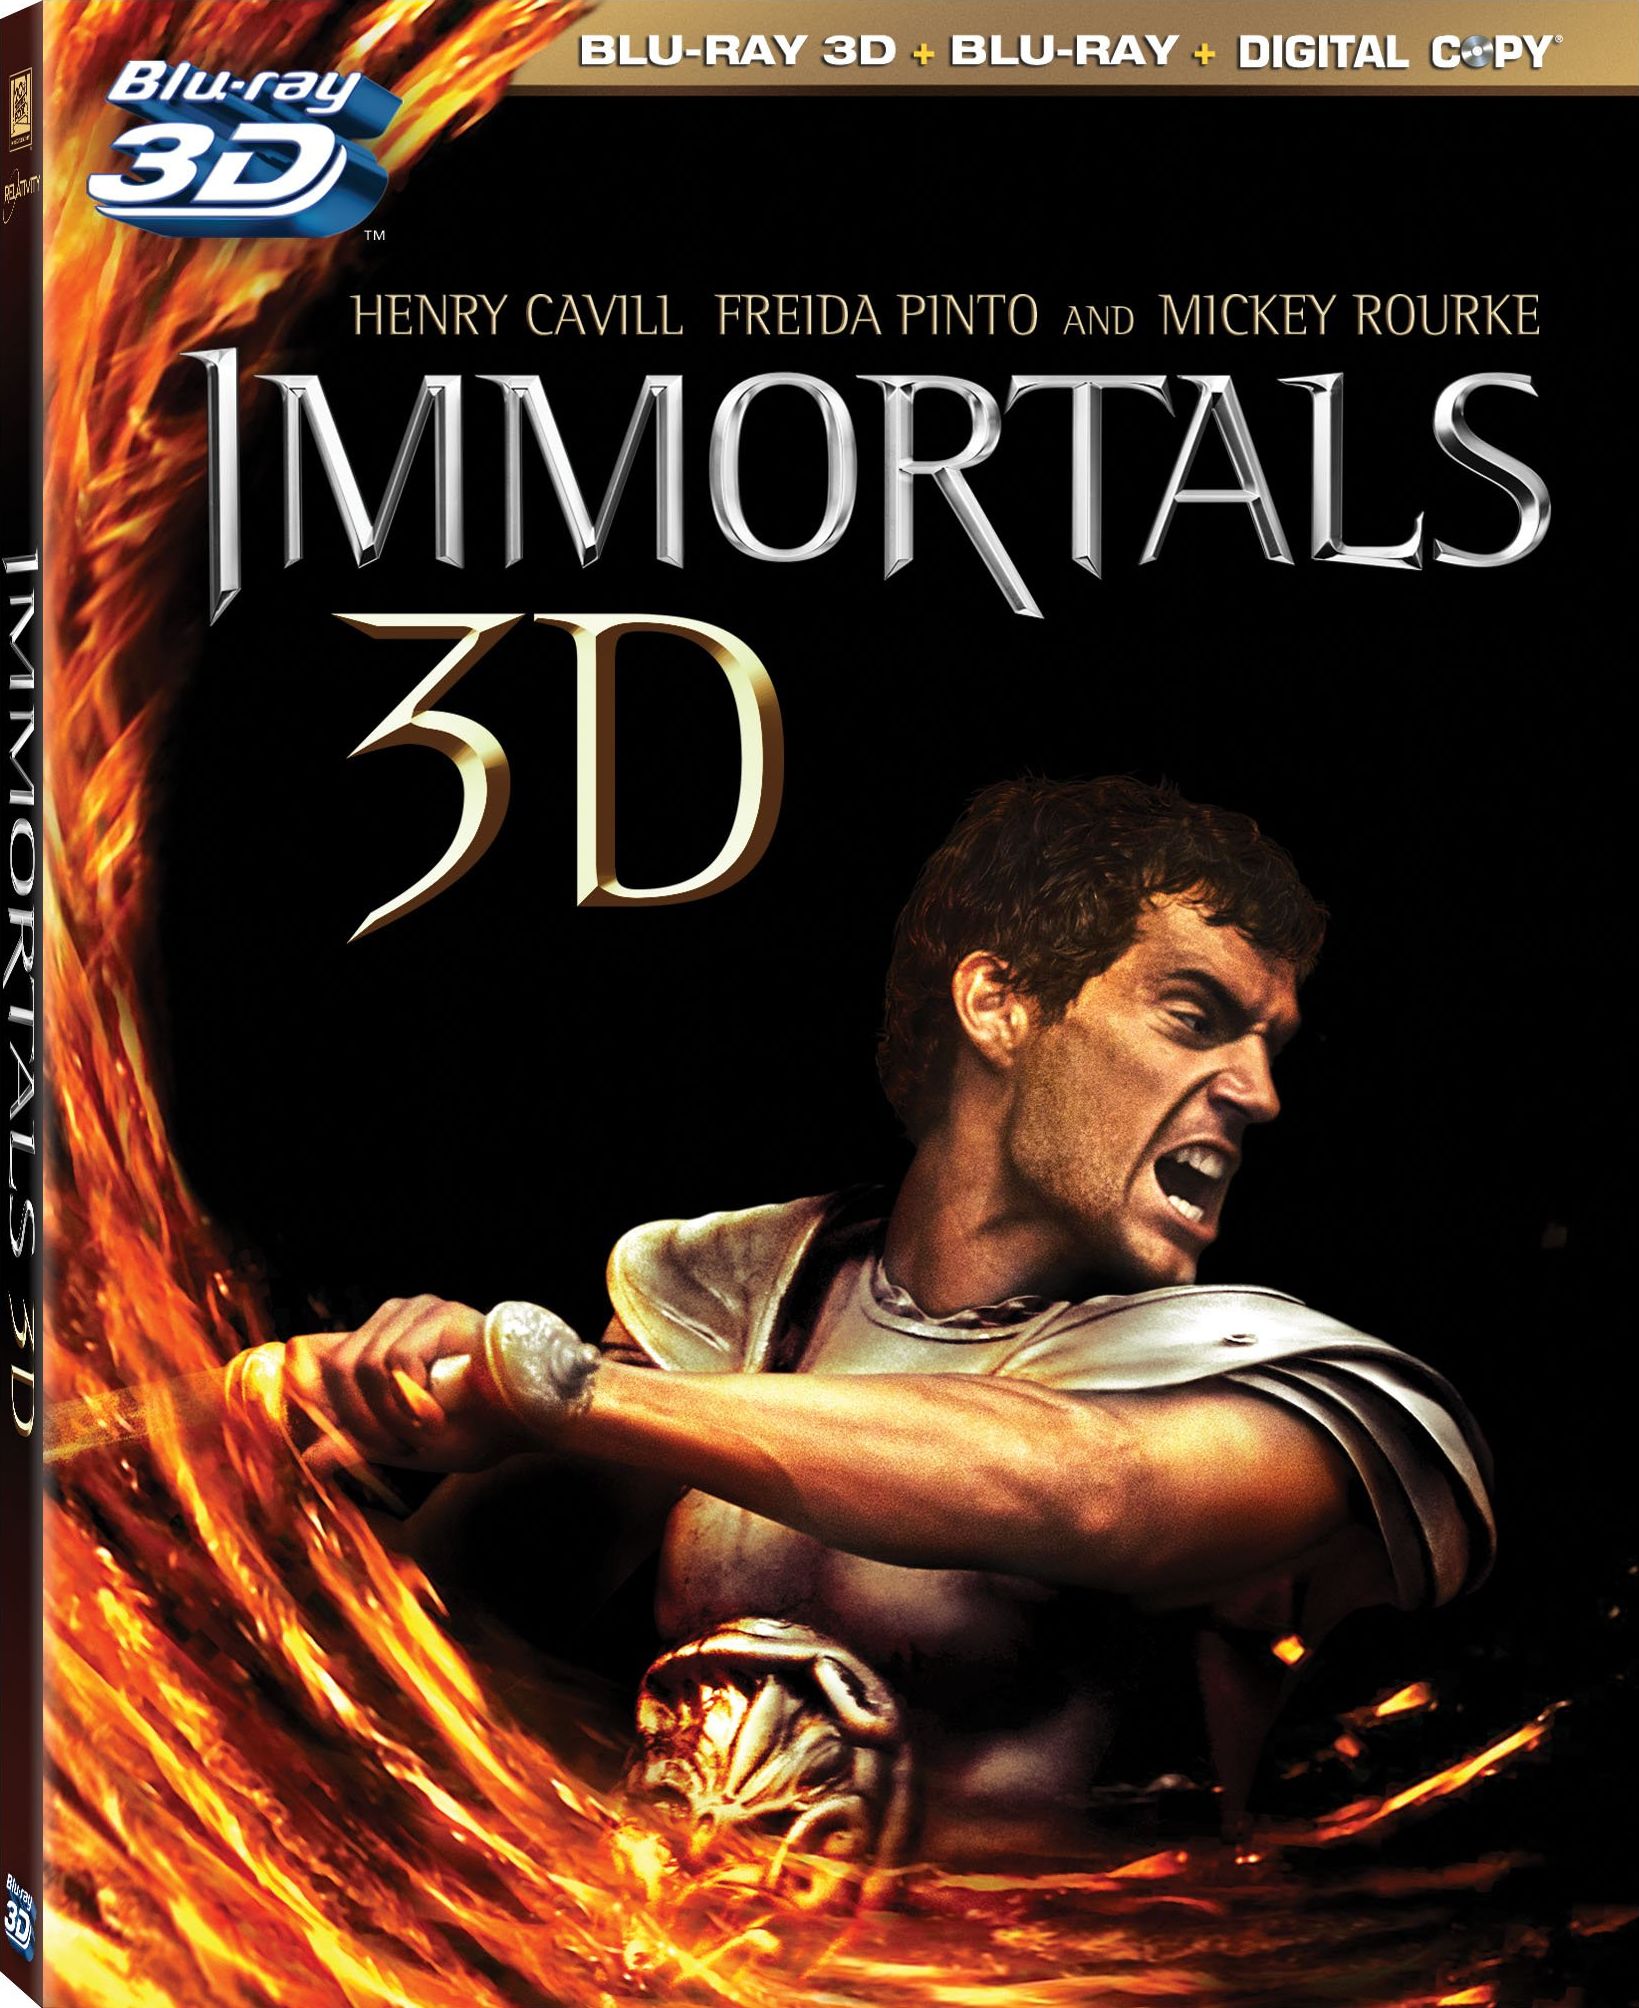 Immortals DVD Release Date March 6, 20121639 x 2008